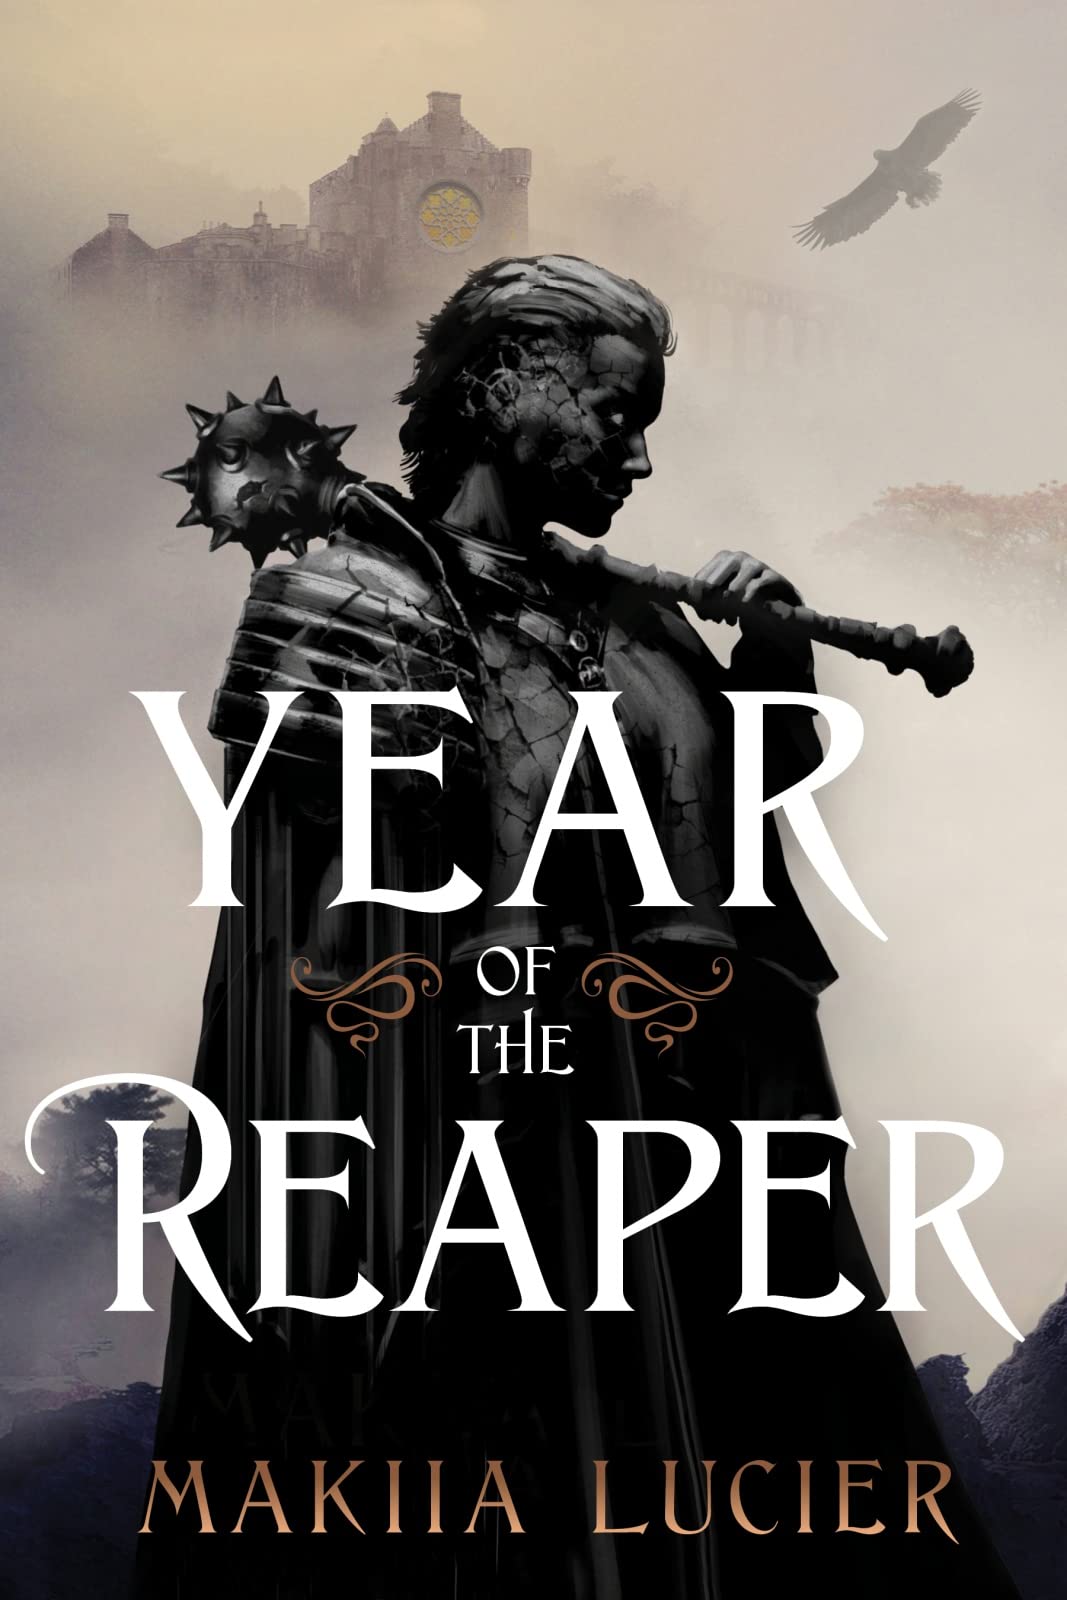 Cover of “Year of the Reaper” by Makha Lucier